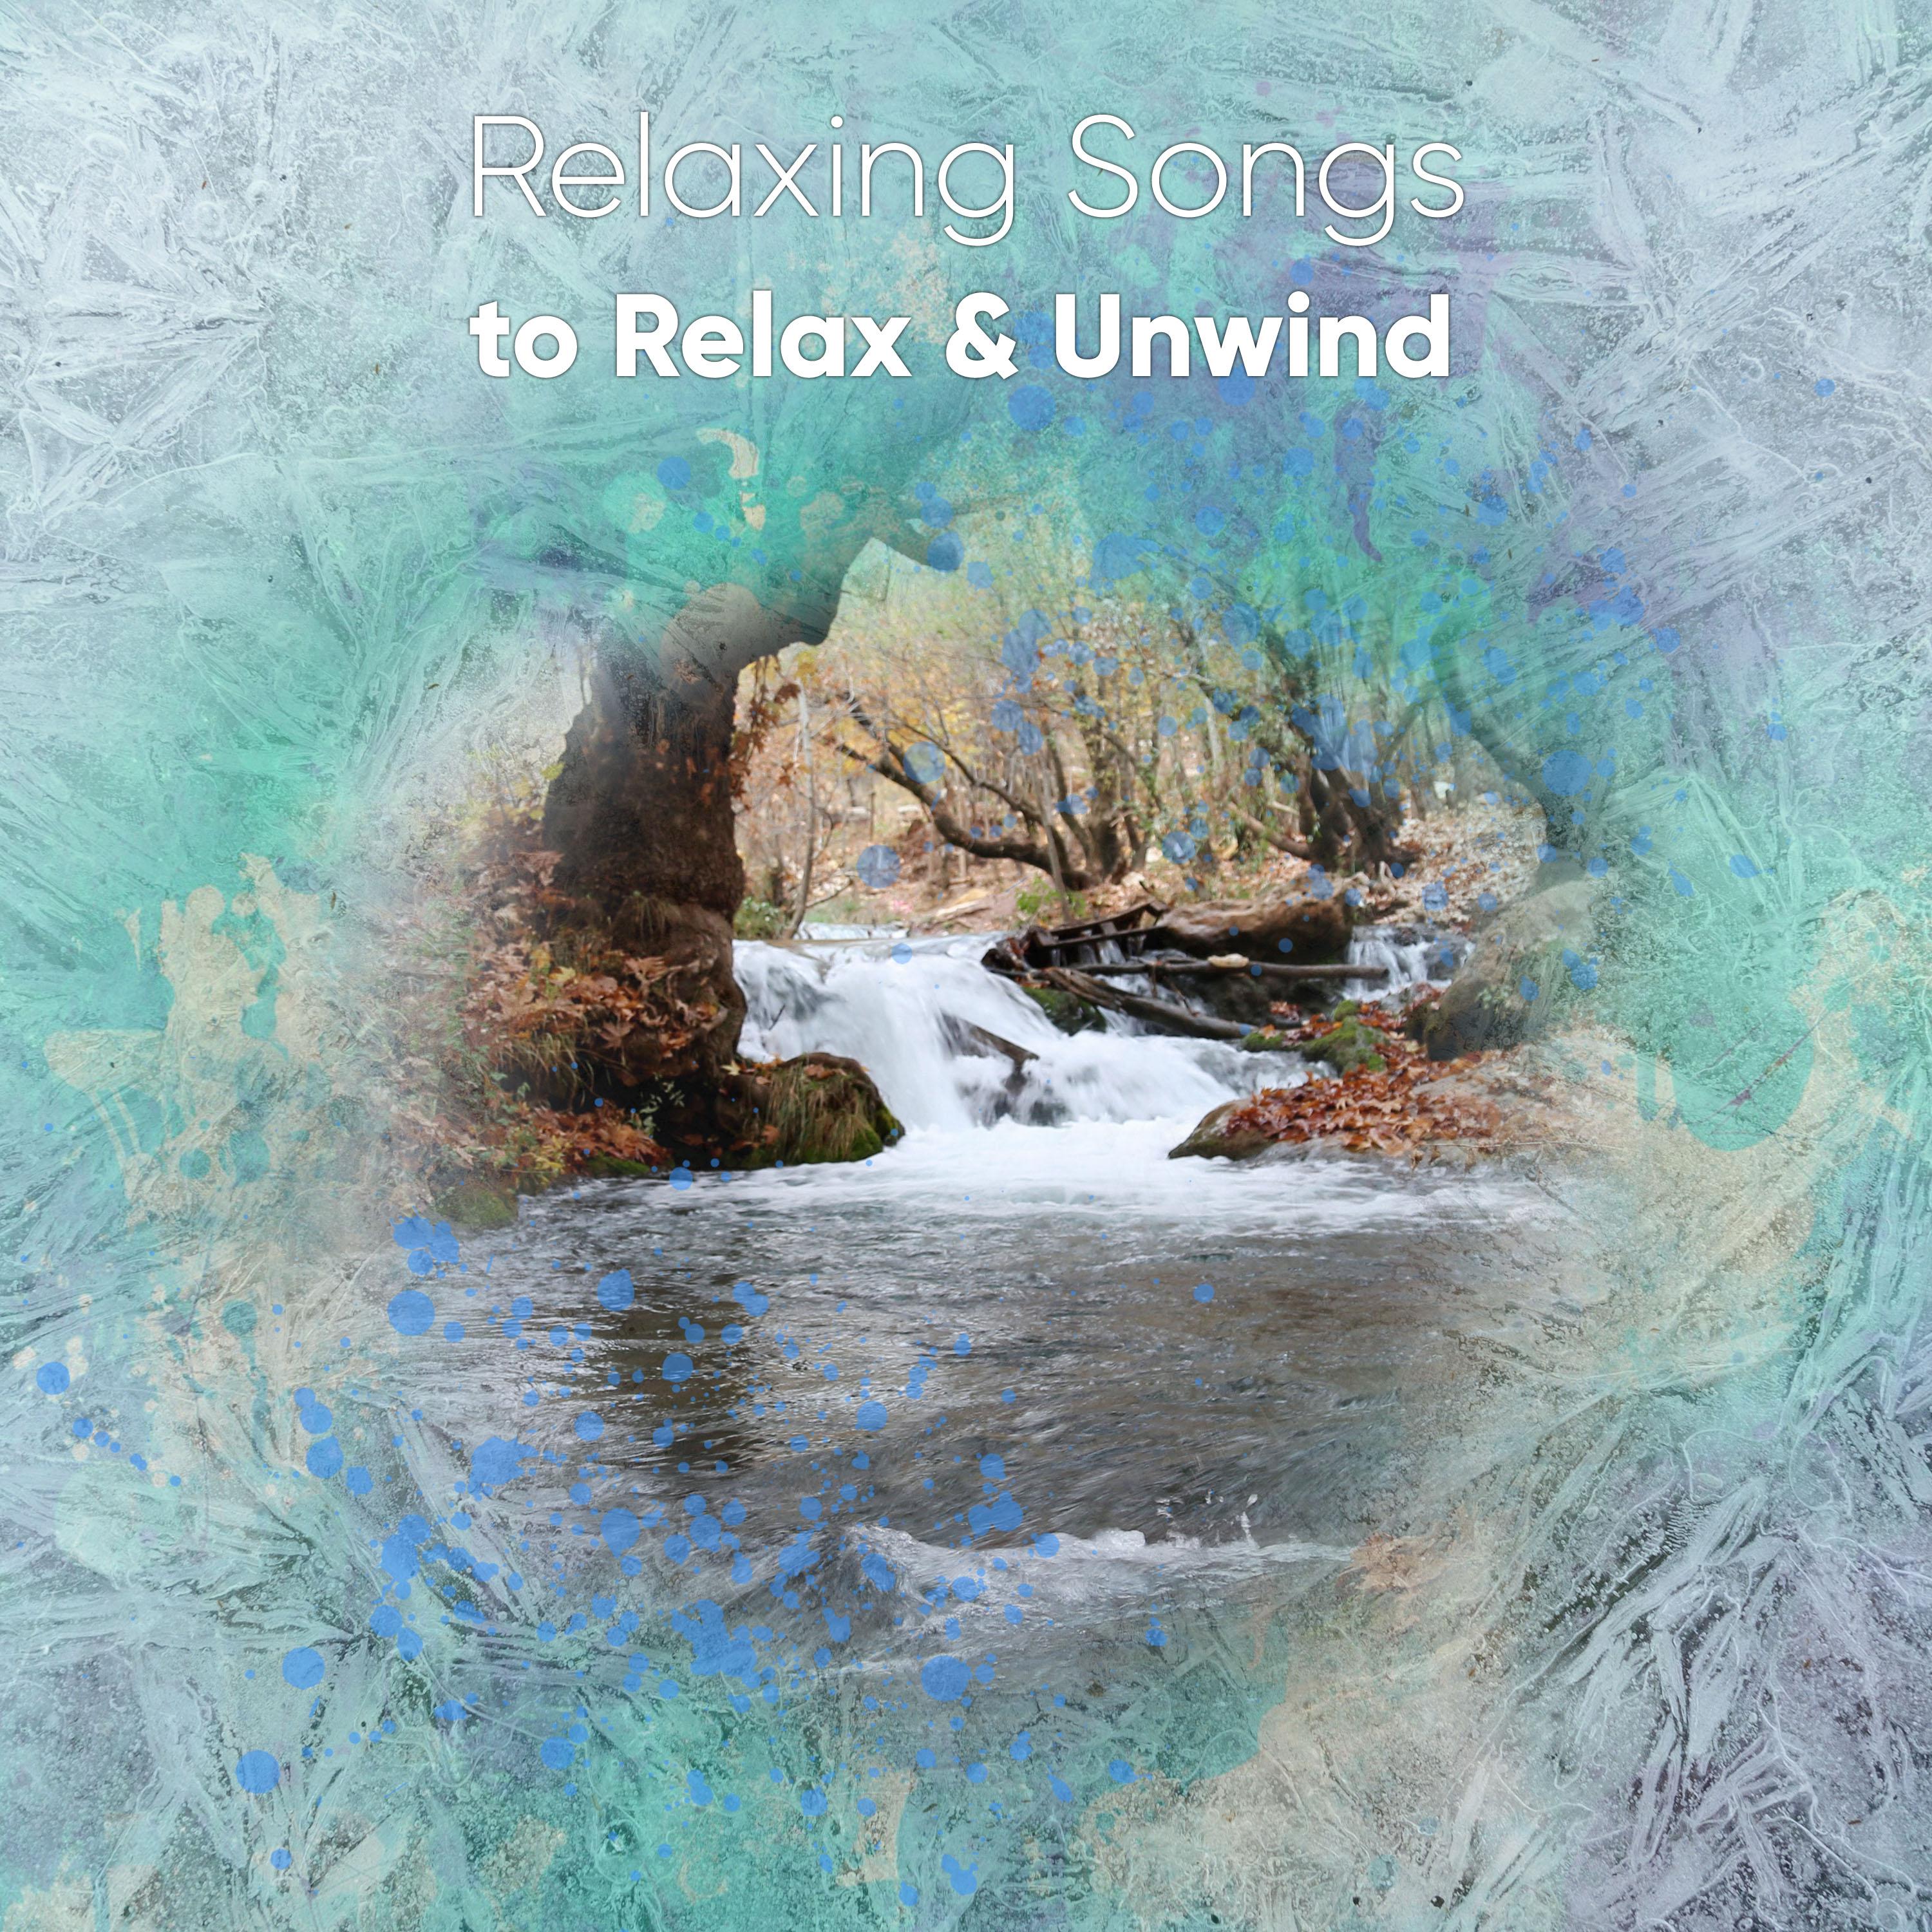 19 Peaceful Sounds for Enlightenment